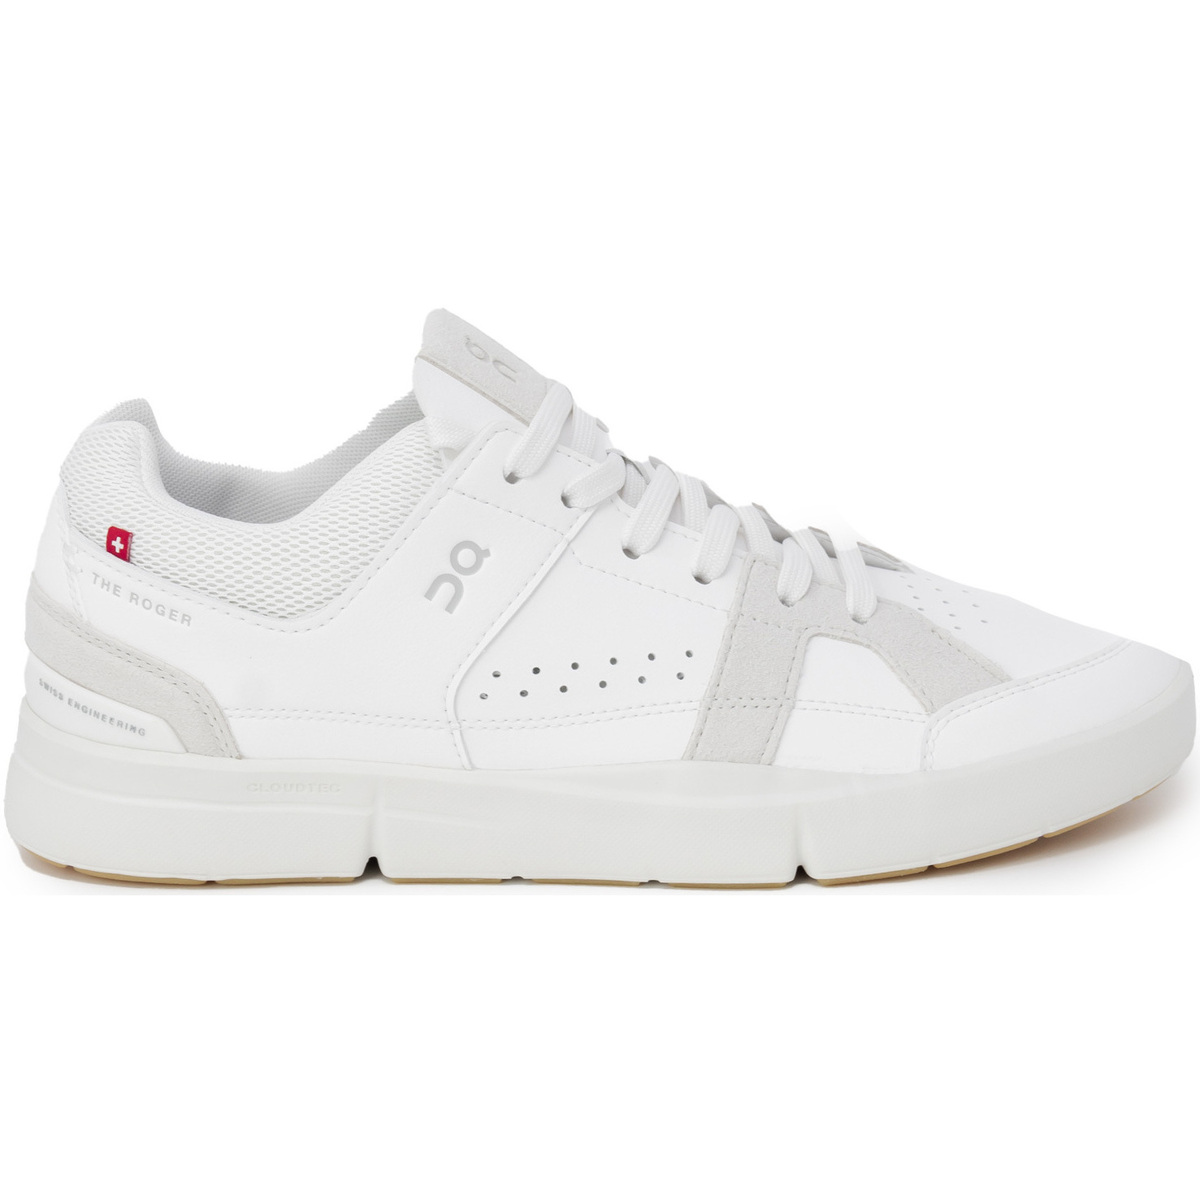 Scarpe Uomo Sneakers On Running THE ROGER Clubhouse 48.99144 Bianco